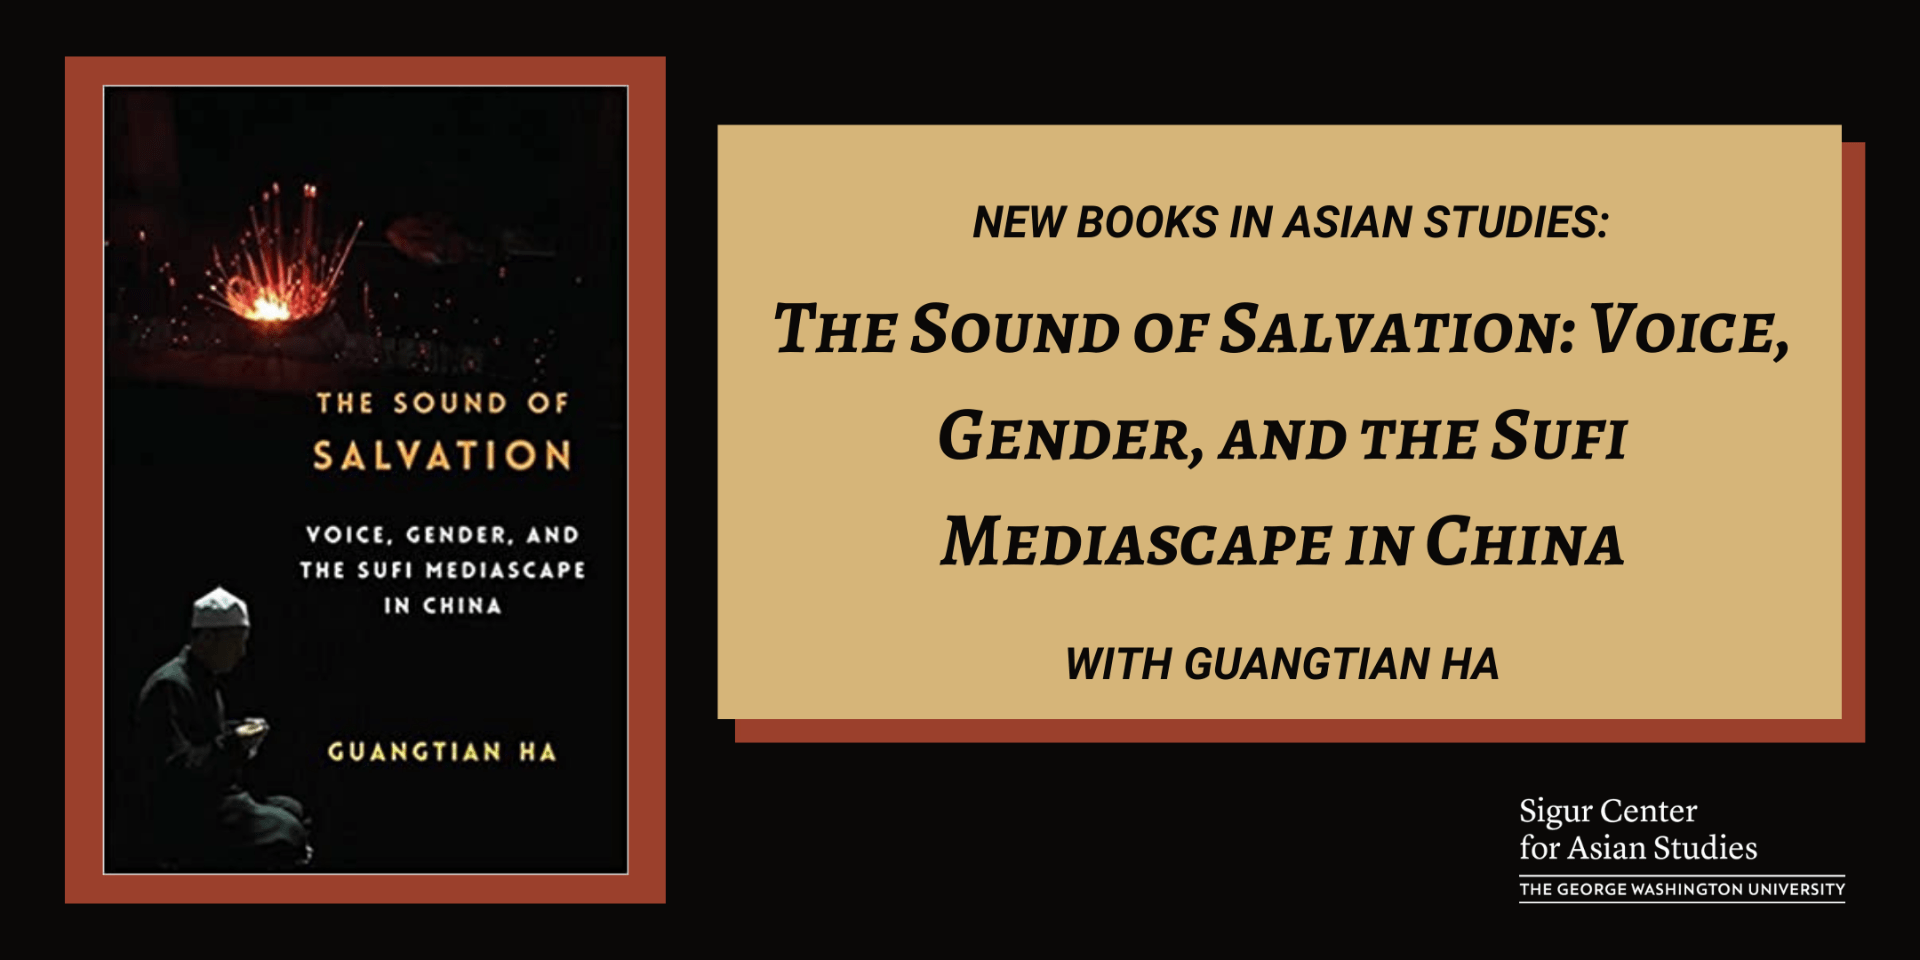 book cover of the sound of salvation next to title of event